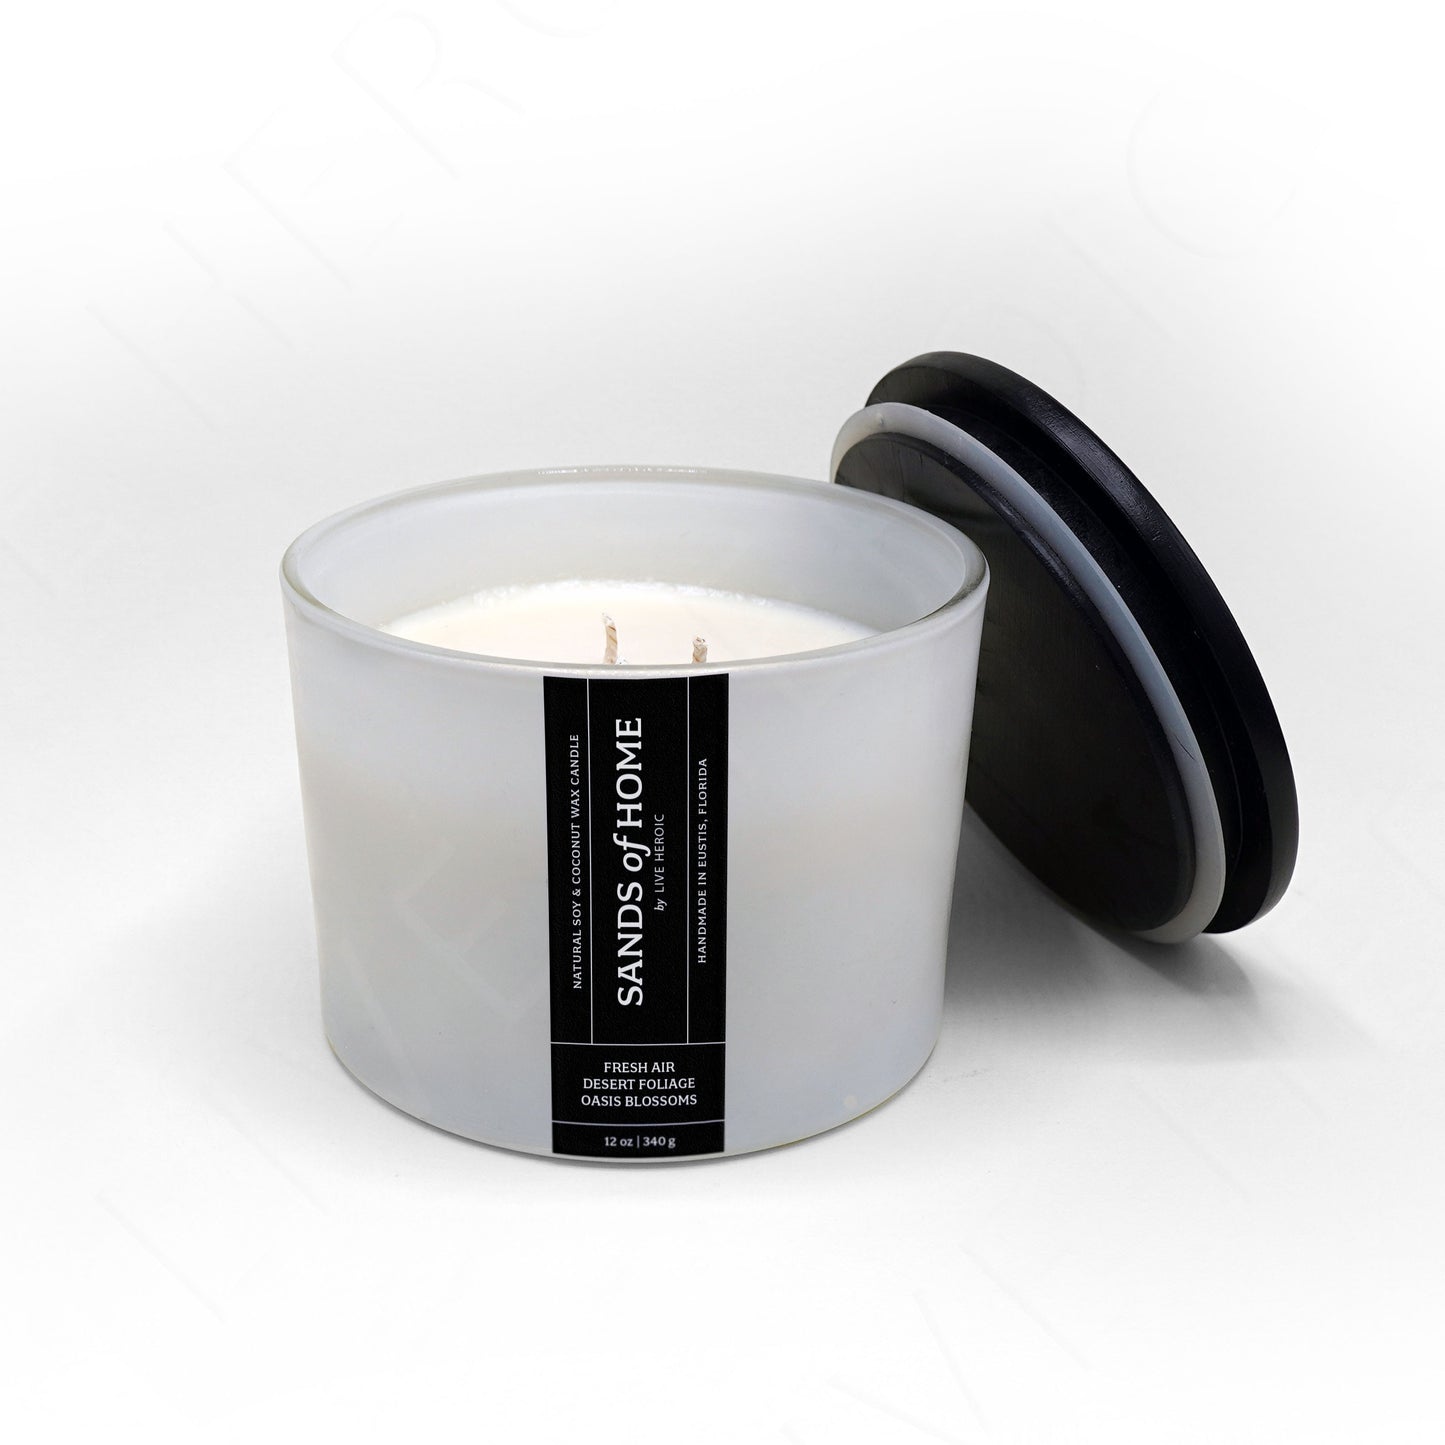 Sands of Home | 12 oz Scented Coconut & Soy Wax Candle by Live Heroic